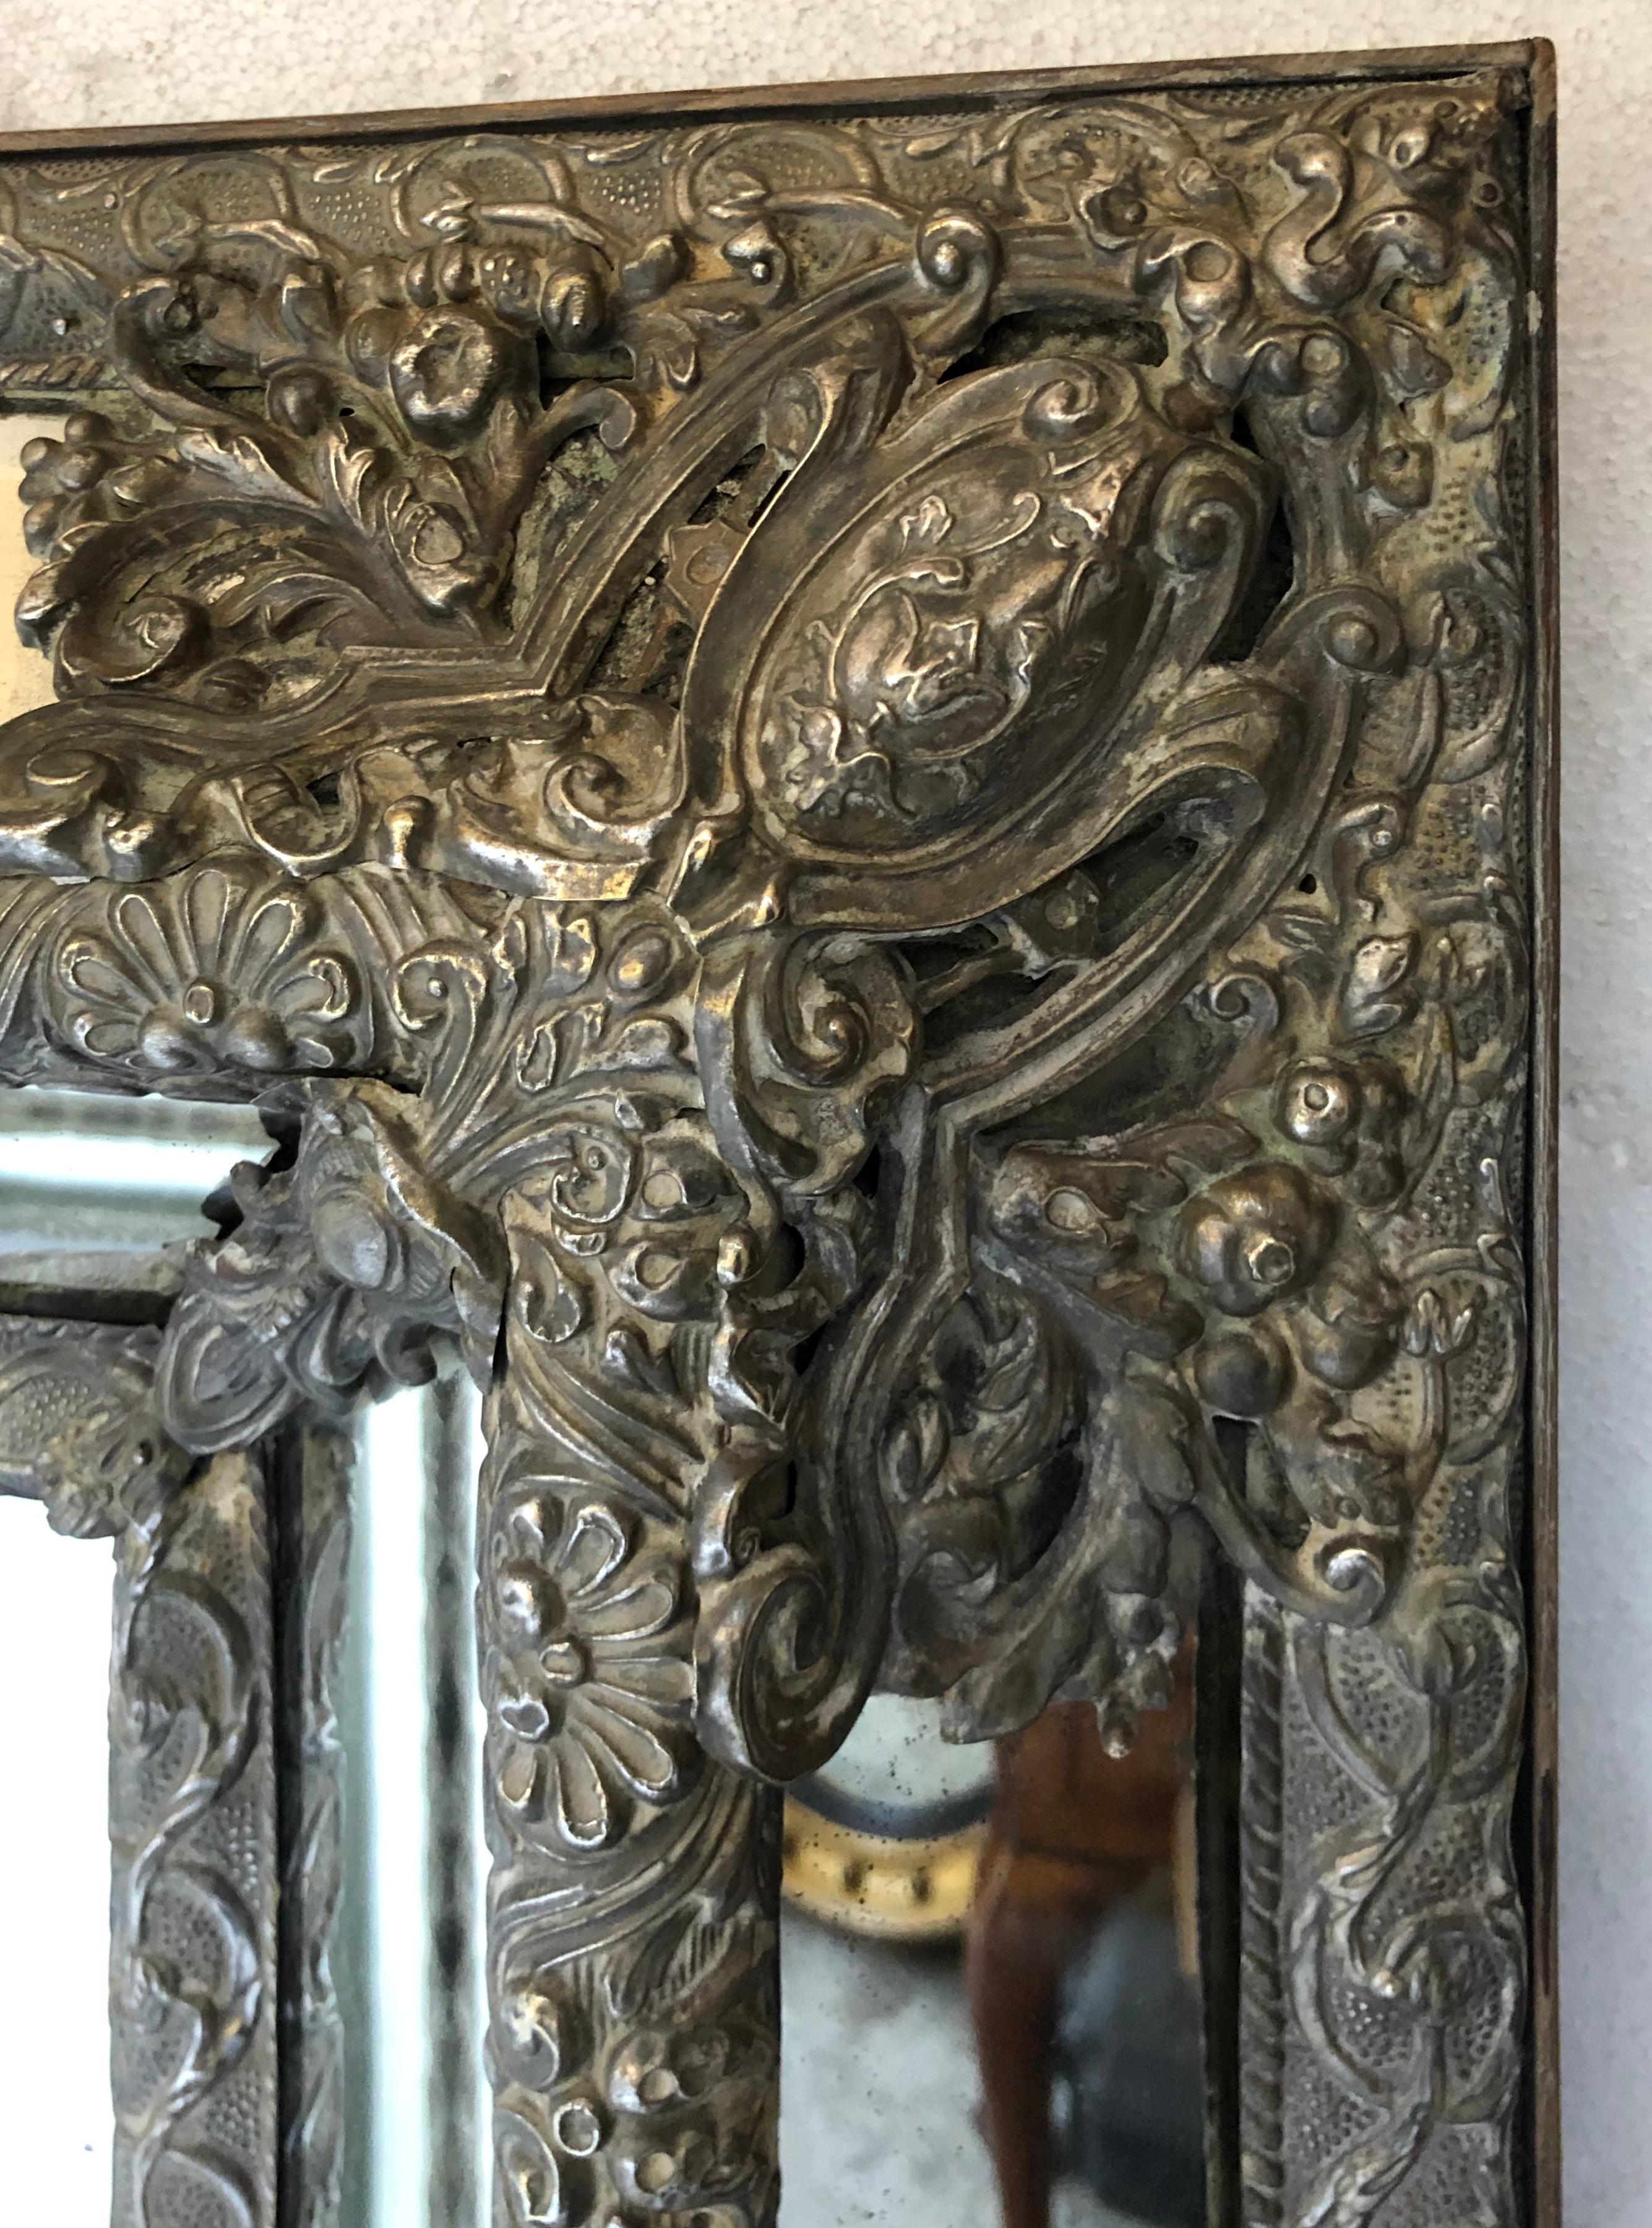 19th century Dutch repousse silvered metal the bevelled rectangular mirror with raised marginal plates the repousse metal work with acanthus and scroll decoration.